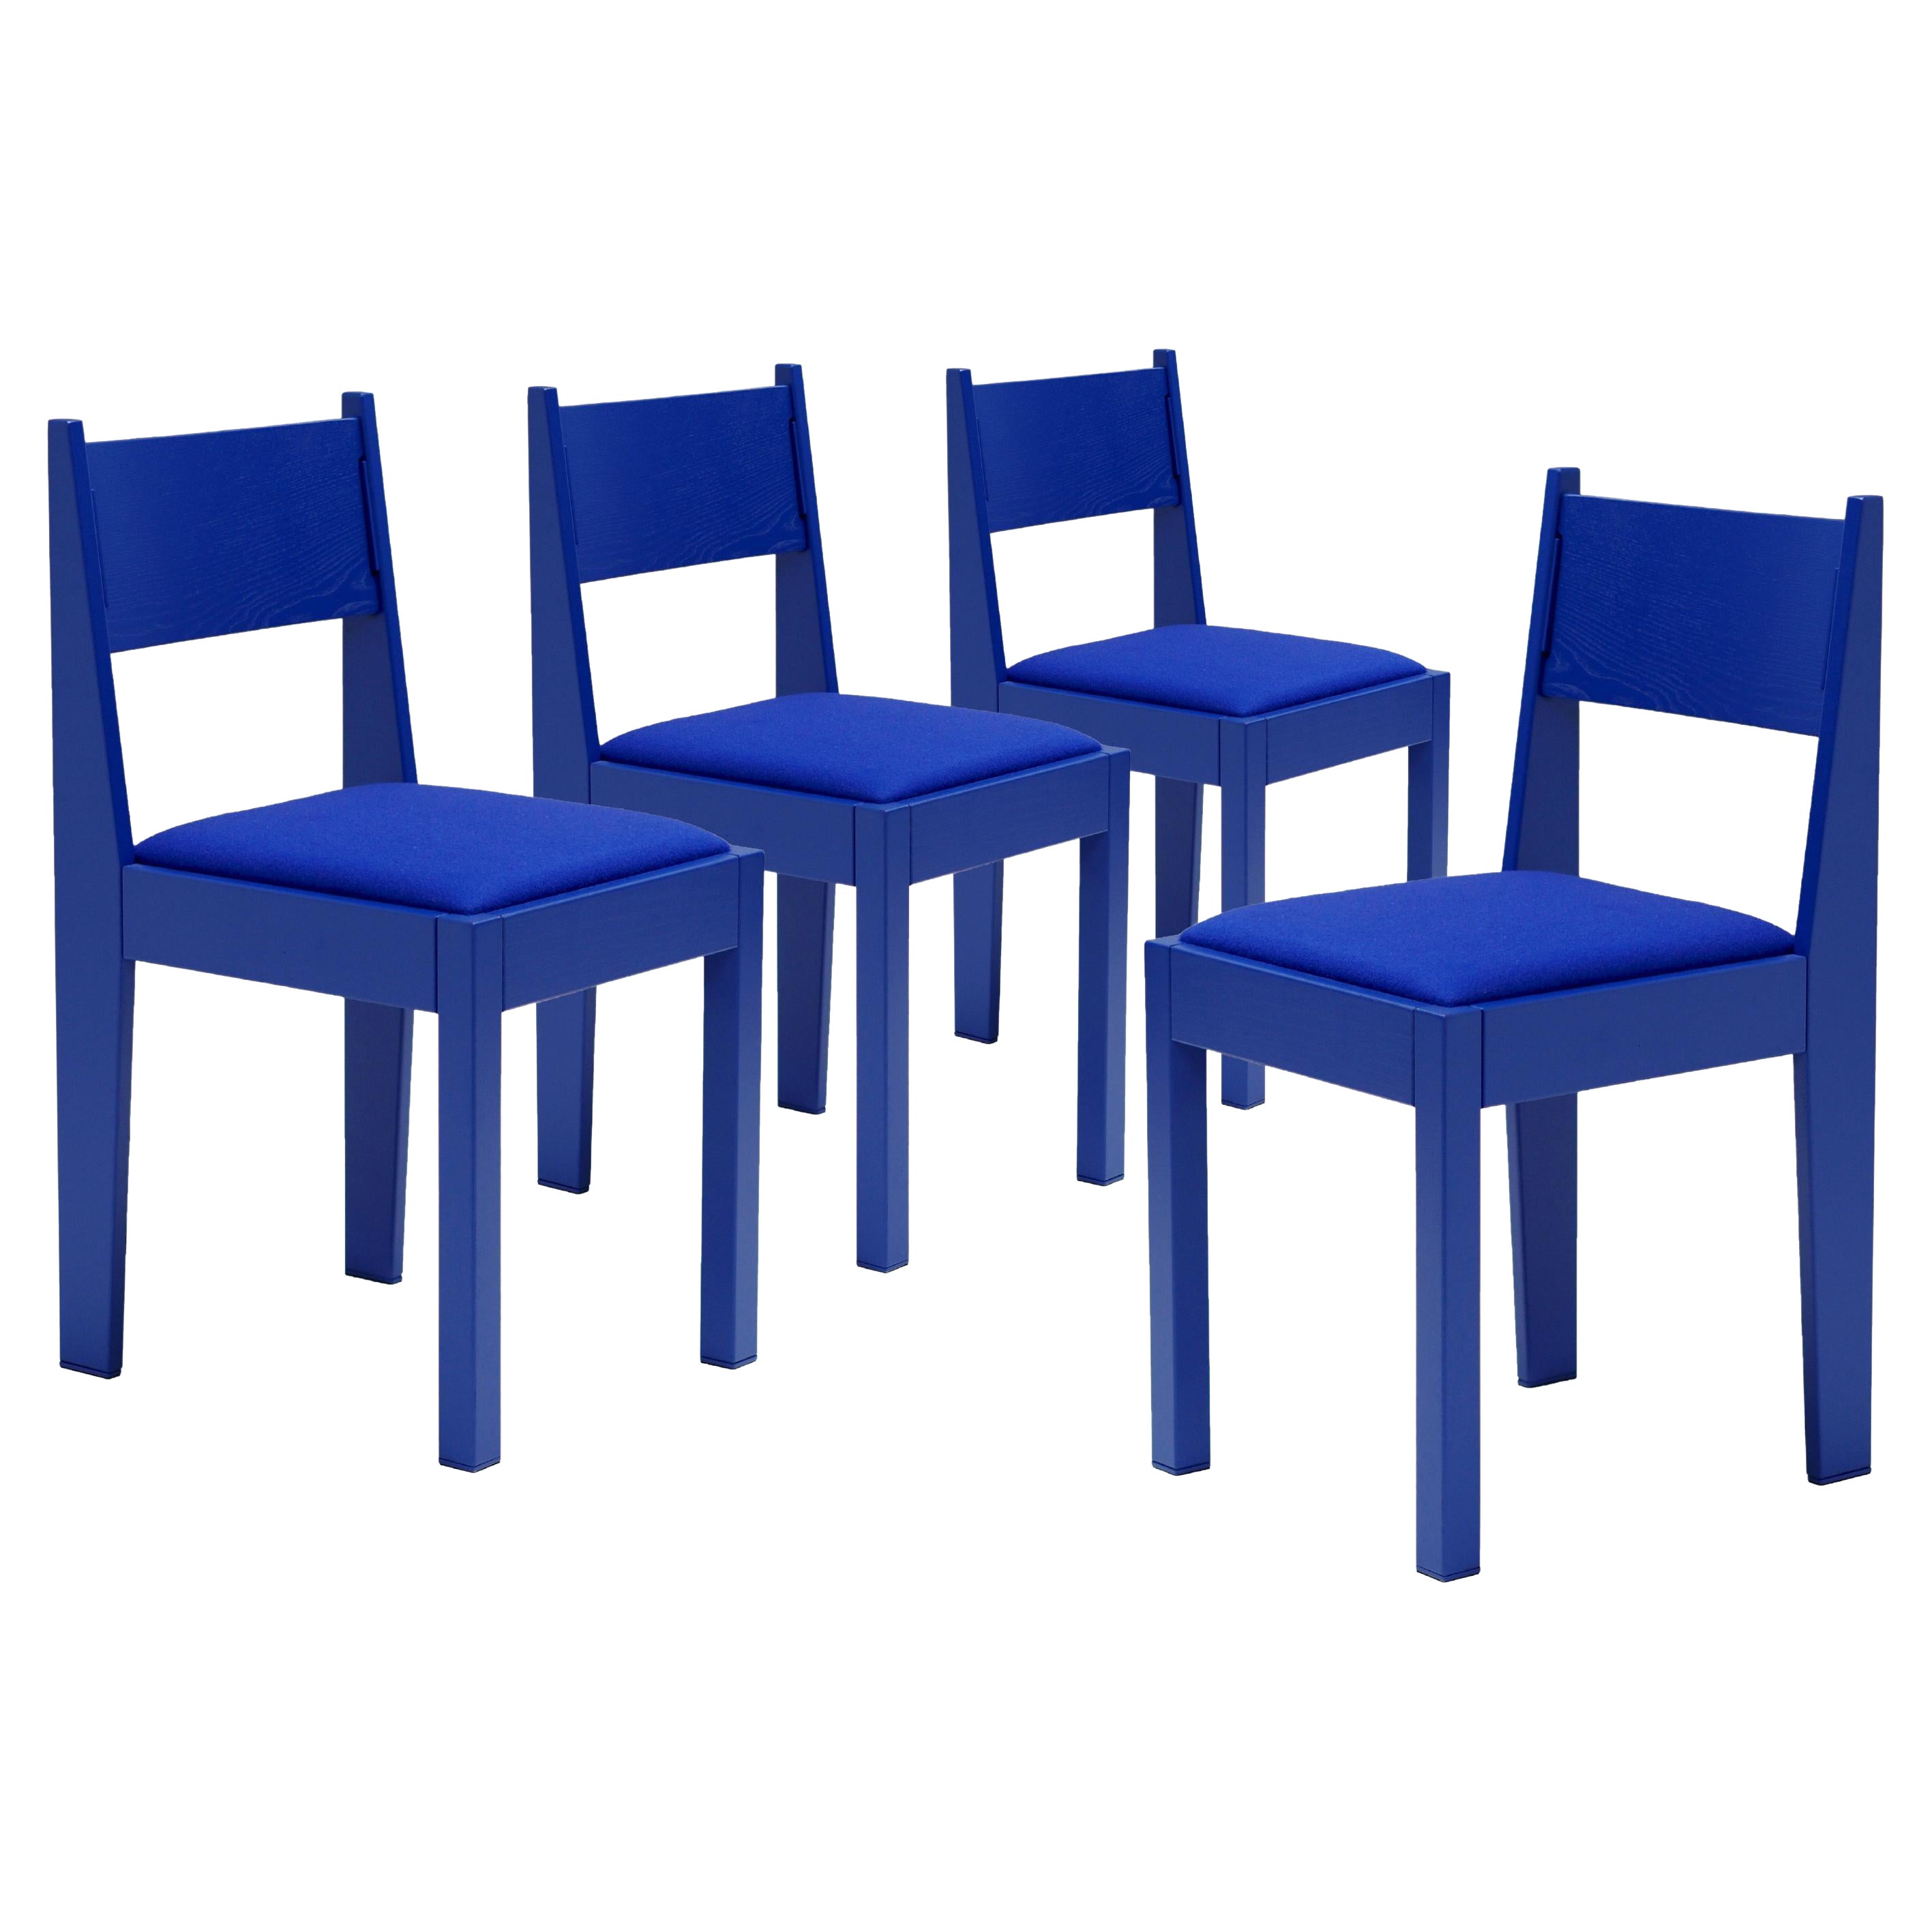 Set of 4 Art Deco Chairs, Special Edition, IKB blue, Customizable For Sale